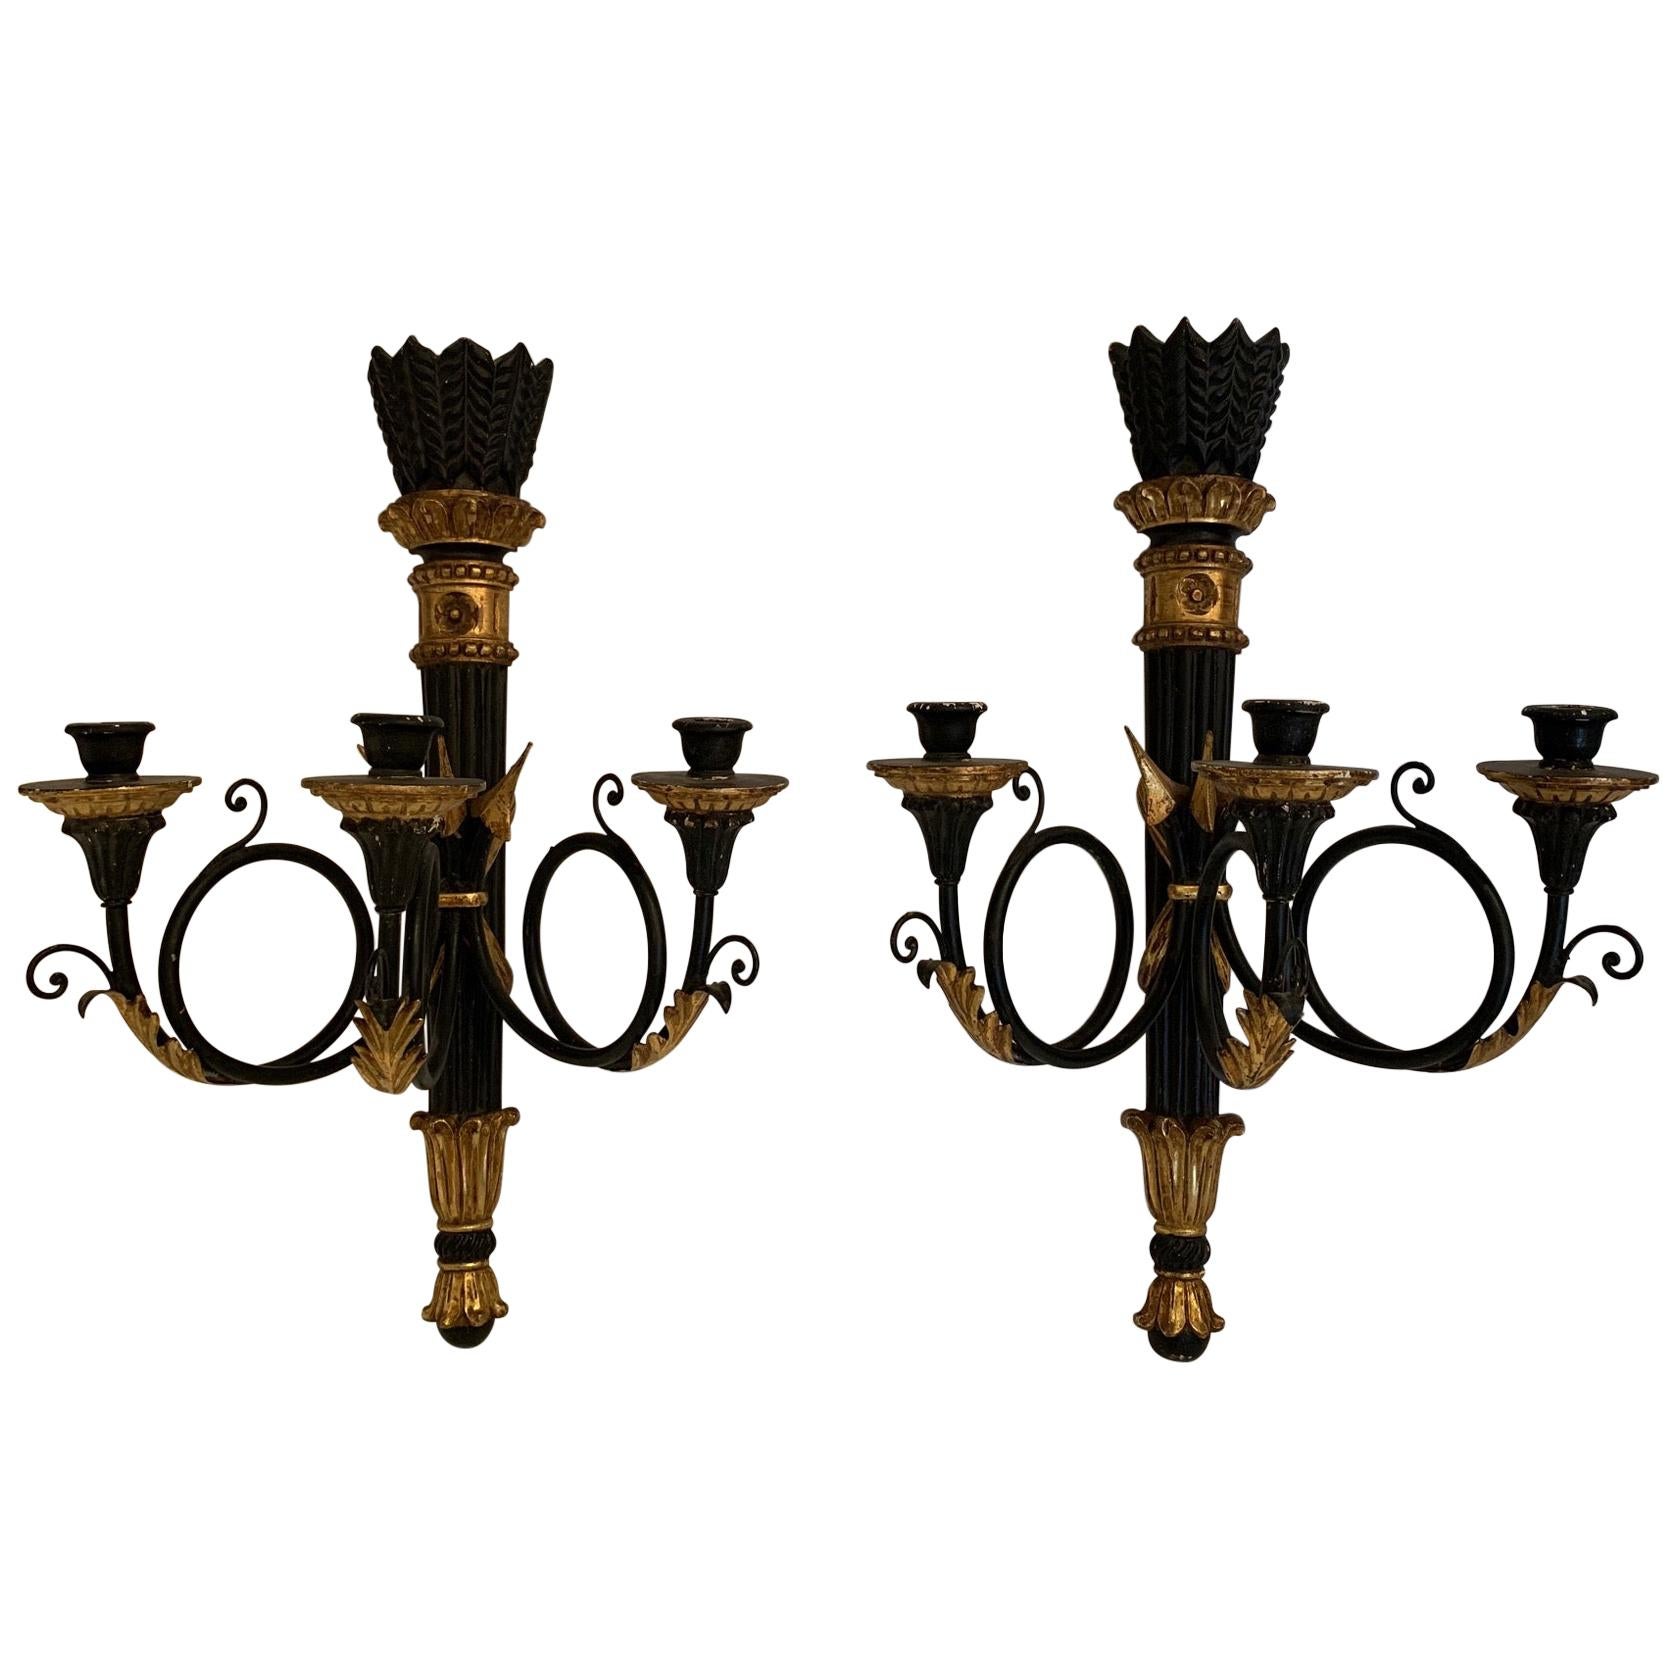 Stunning Pair of Italian Black and Gold Neoclassical Style Sconces For Sale